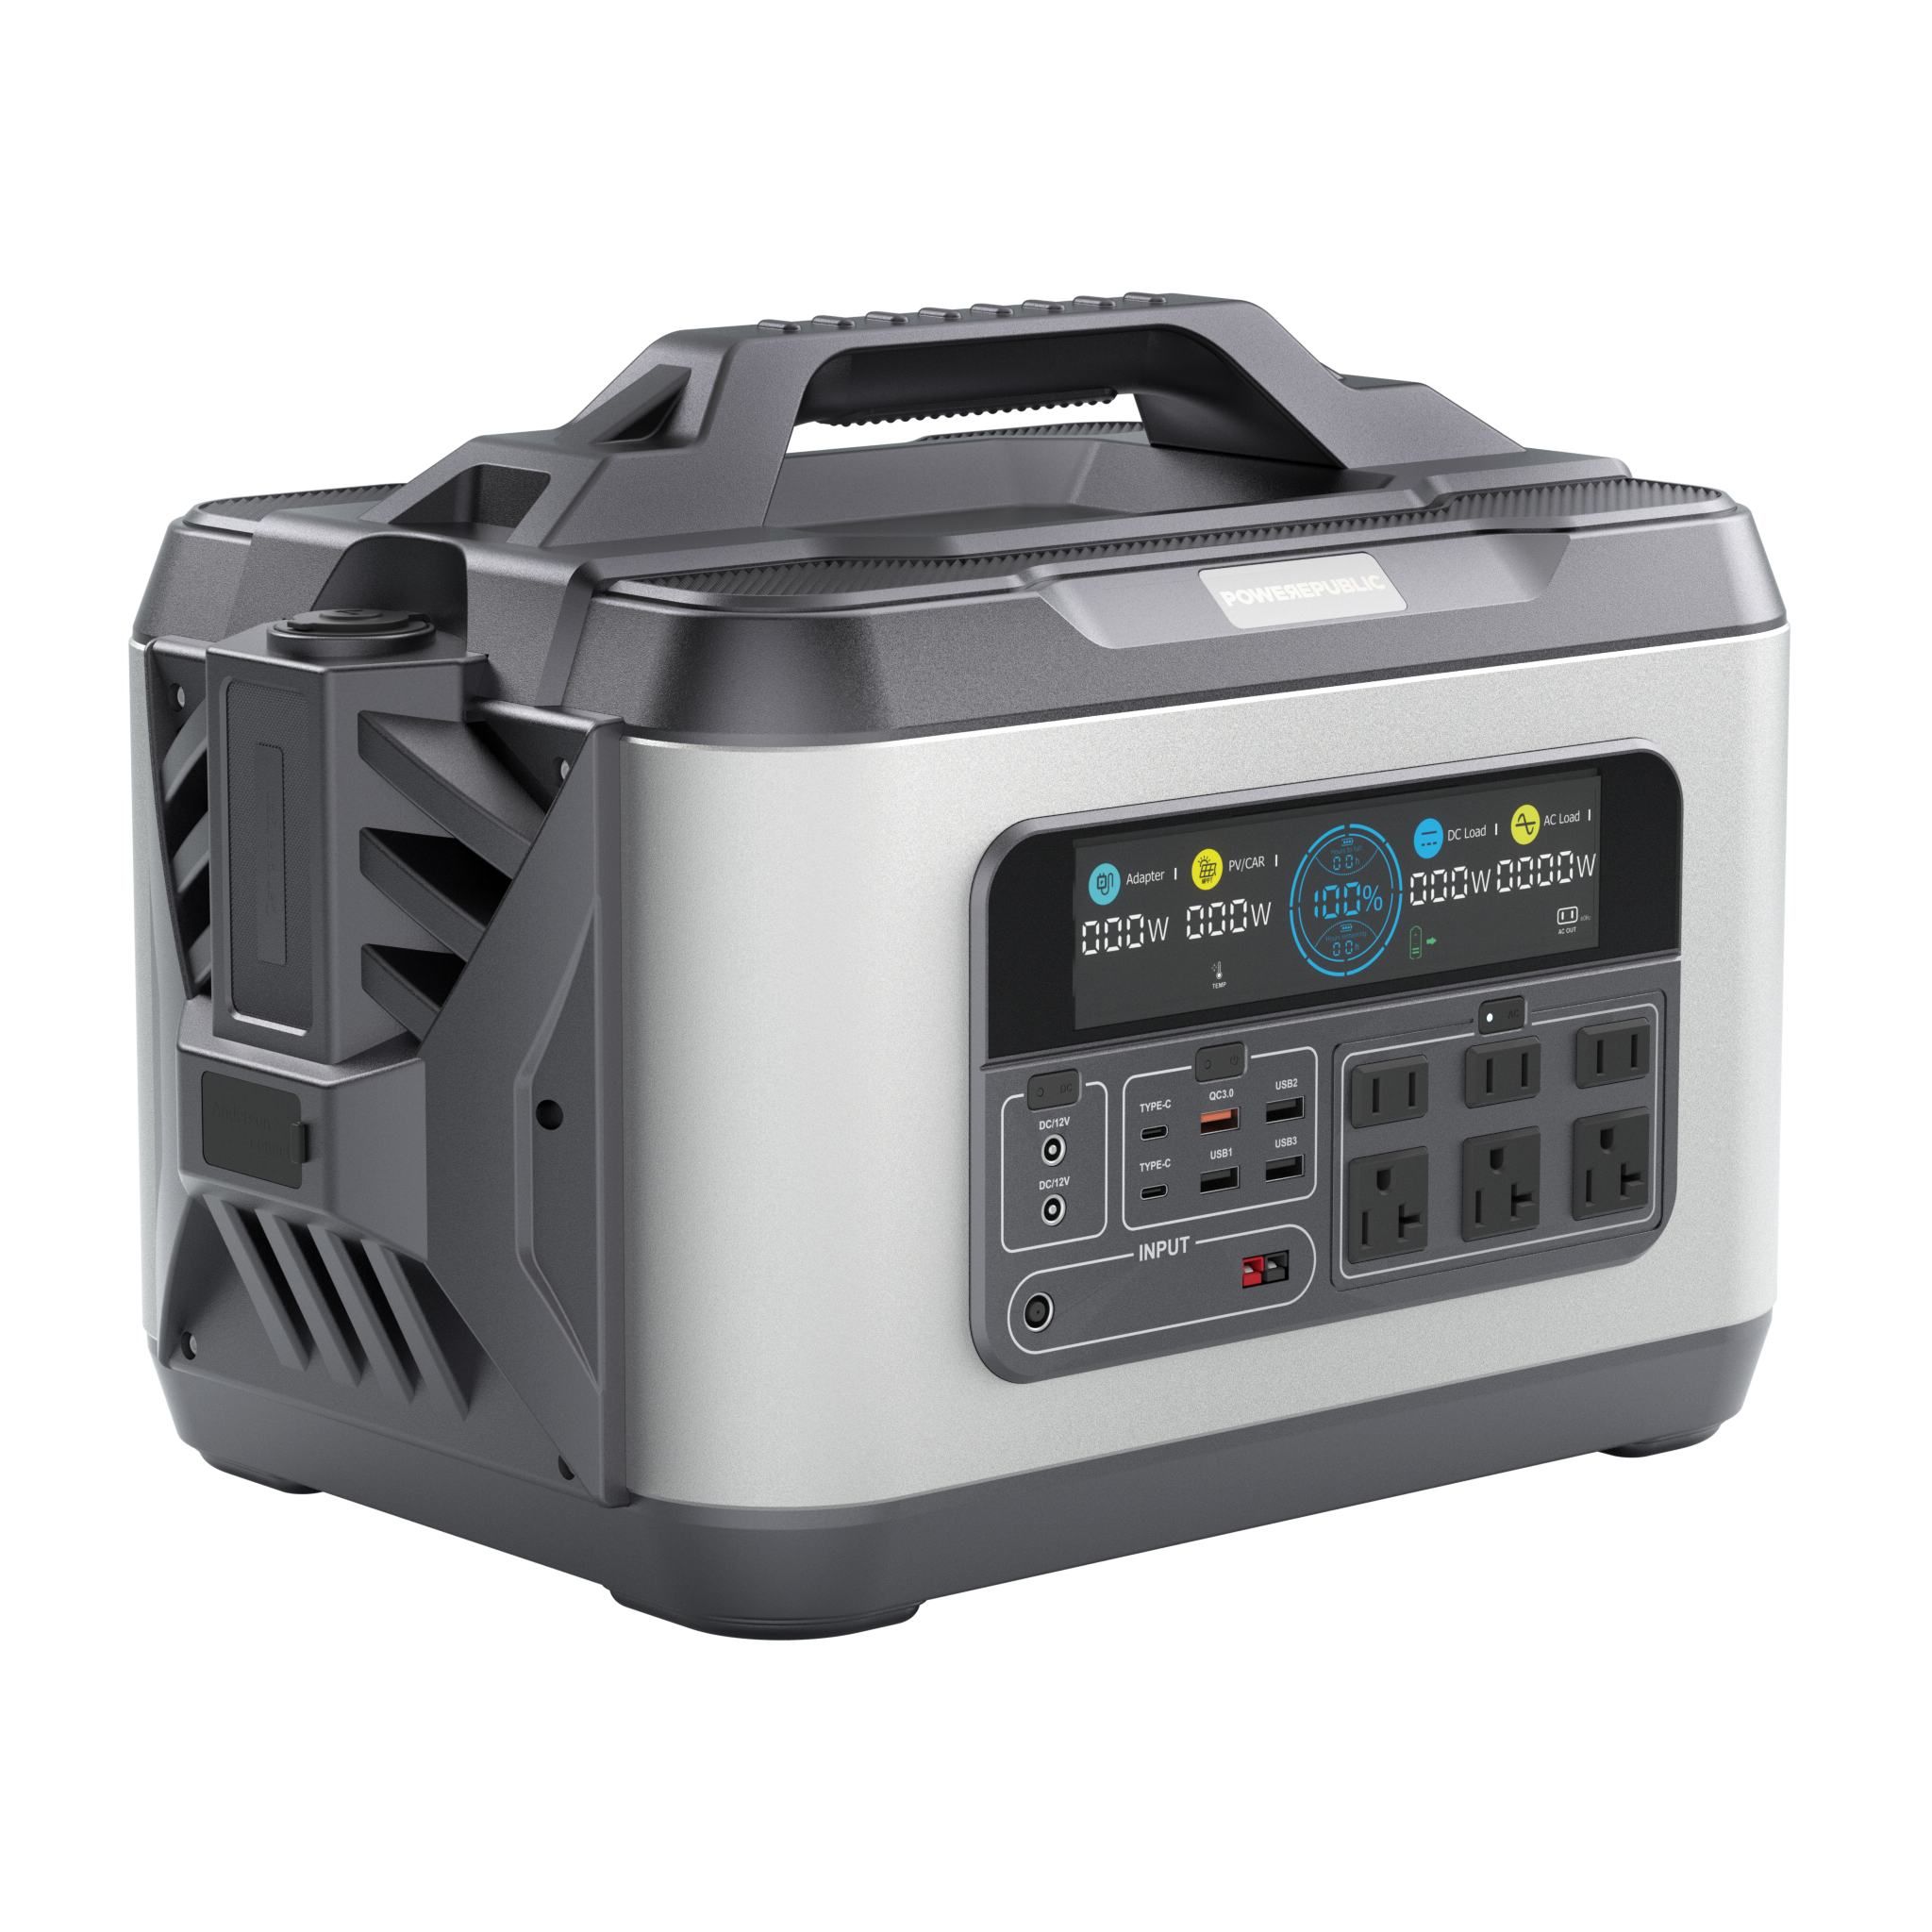 POWEREPUBLIC T2200 portable power station, 2200W 2240Wh, metallic gray aluminum-alloy body with aircraft wing design, a handle, an LCD screen, and input and output ports.